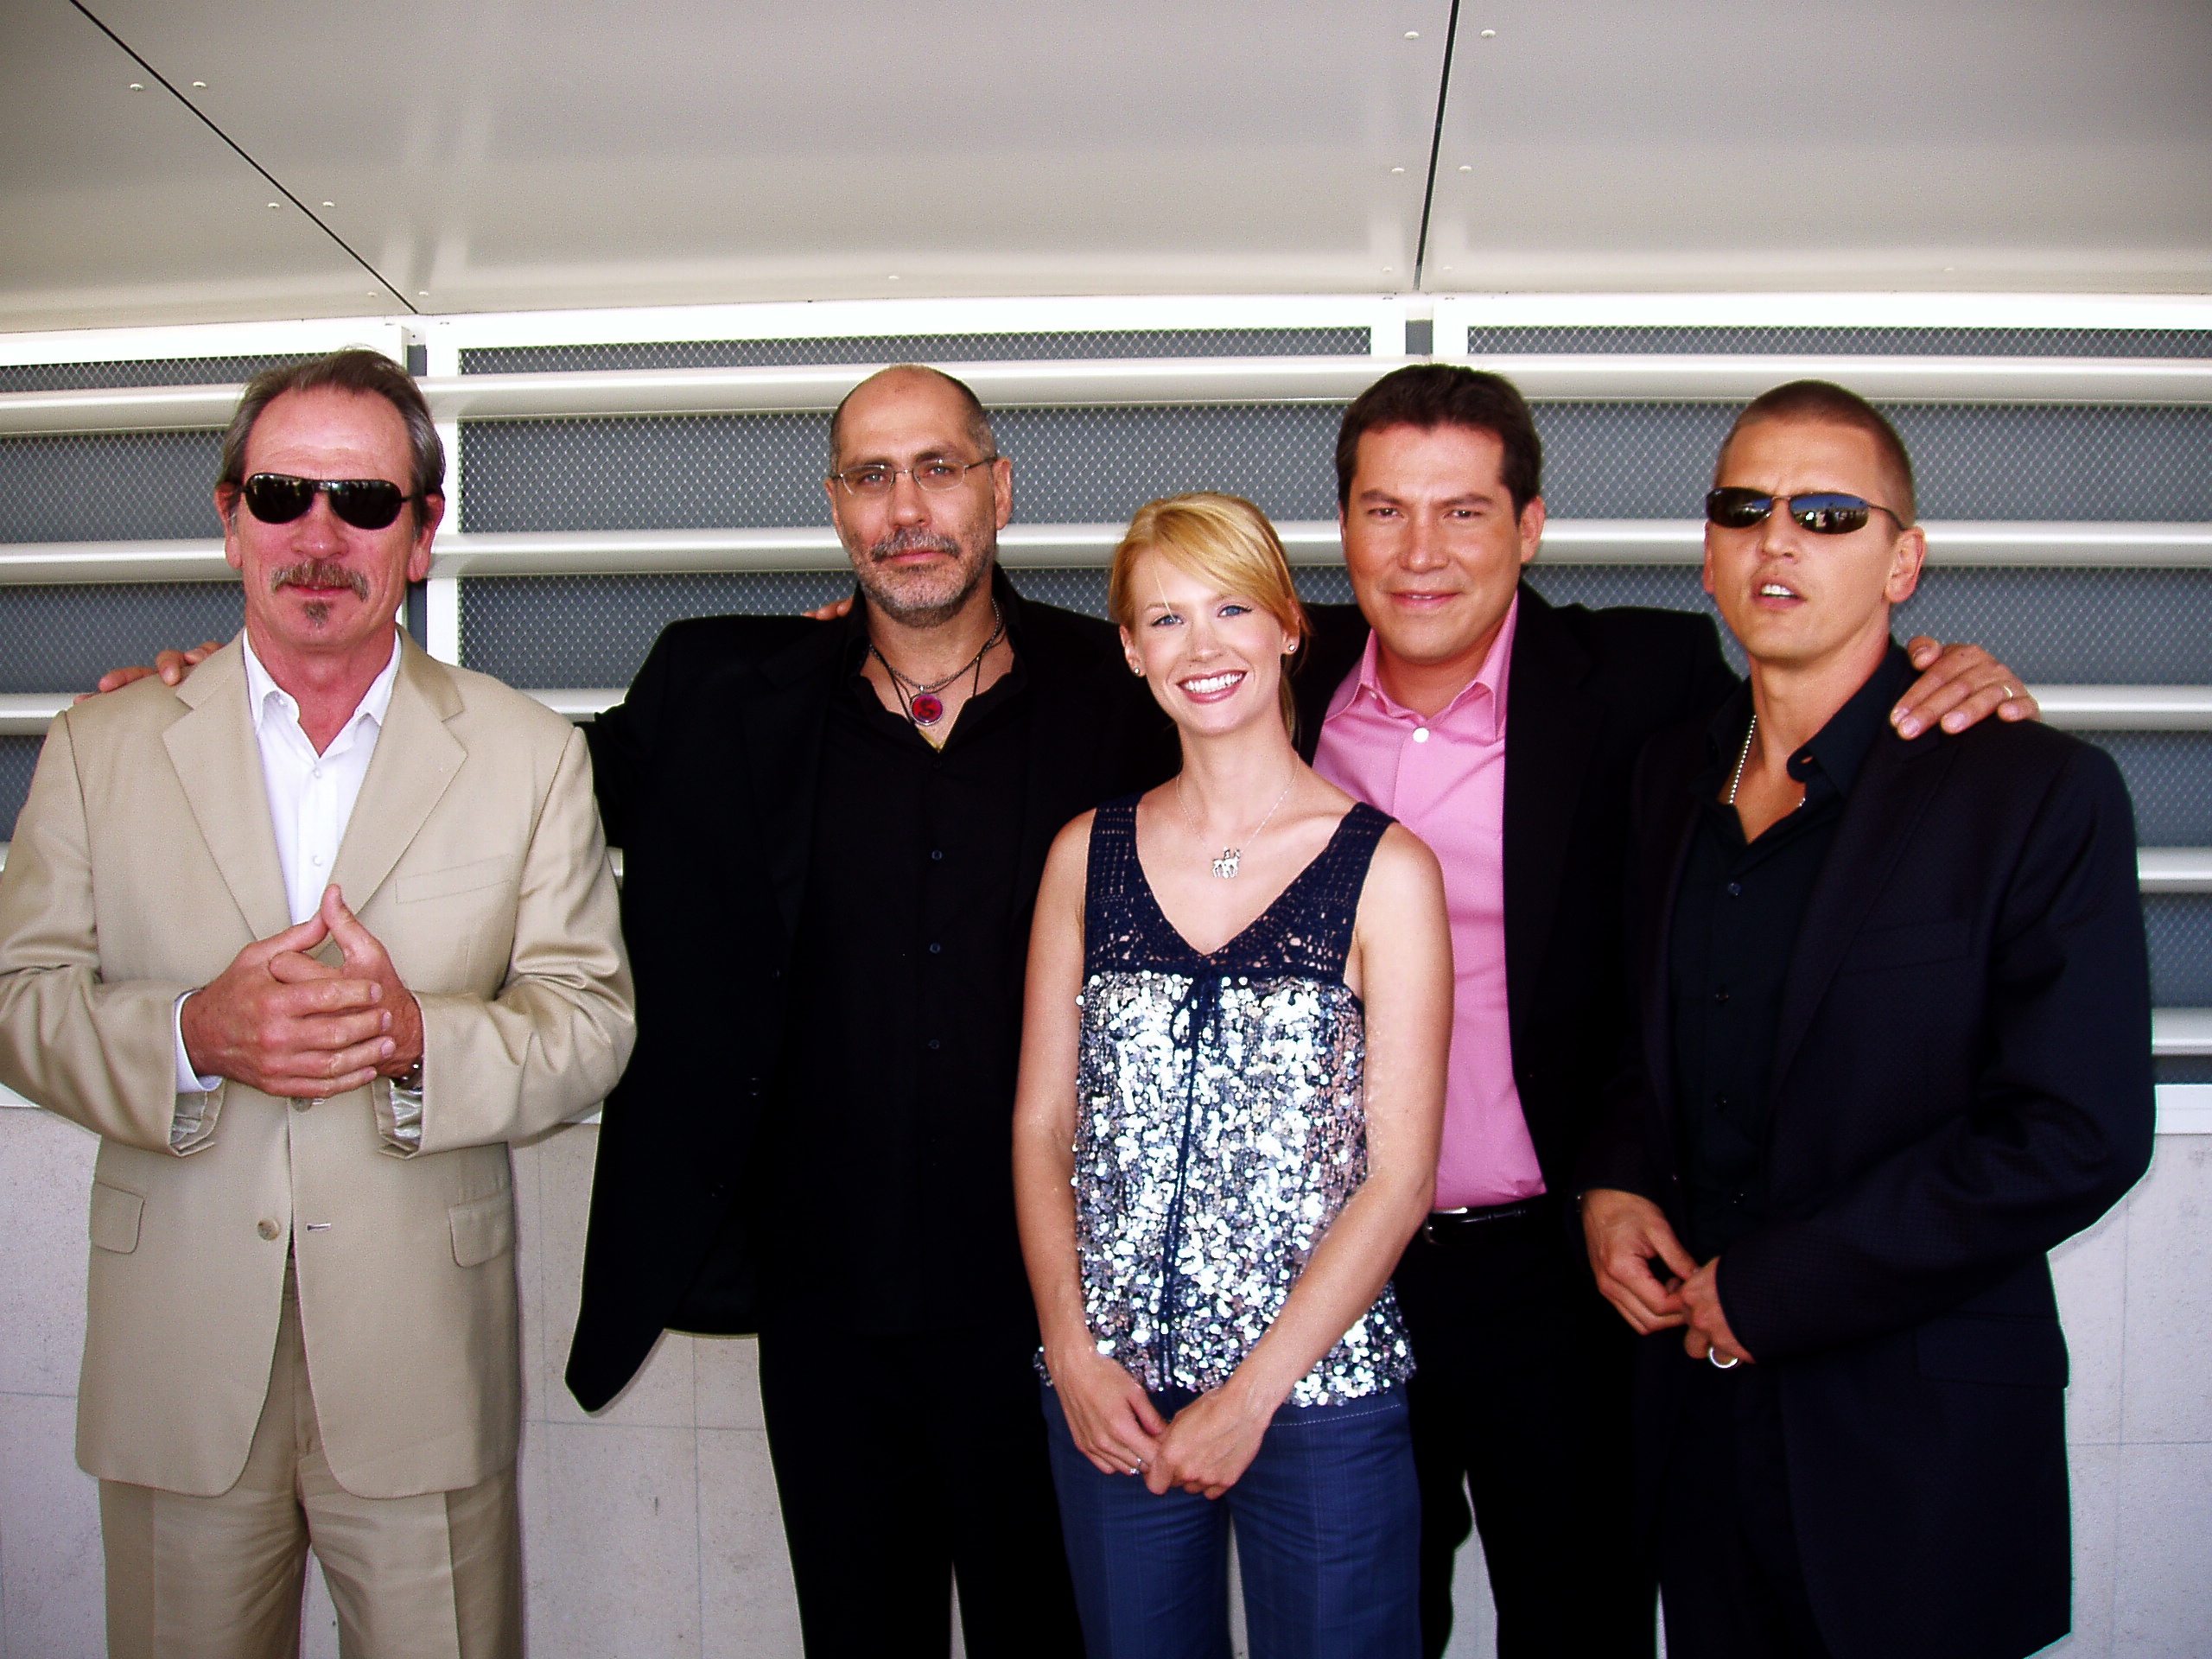 2005 Cannes Film Festival. Cannes France. The Official Photo Call. Tommy Lee Jones, Guillermo Arriaga, January Jones, Julio César Cedillo and Barry Pepper.